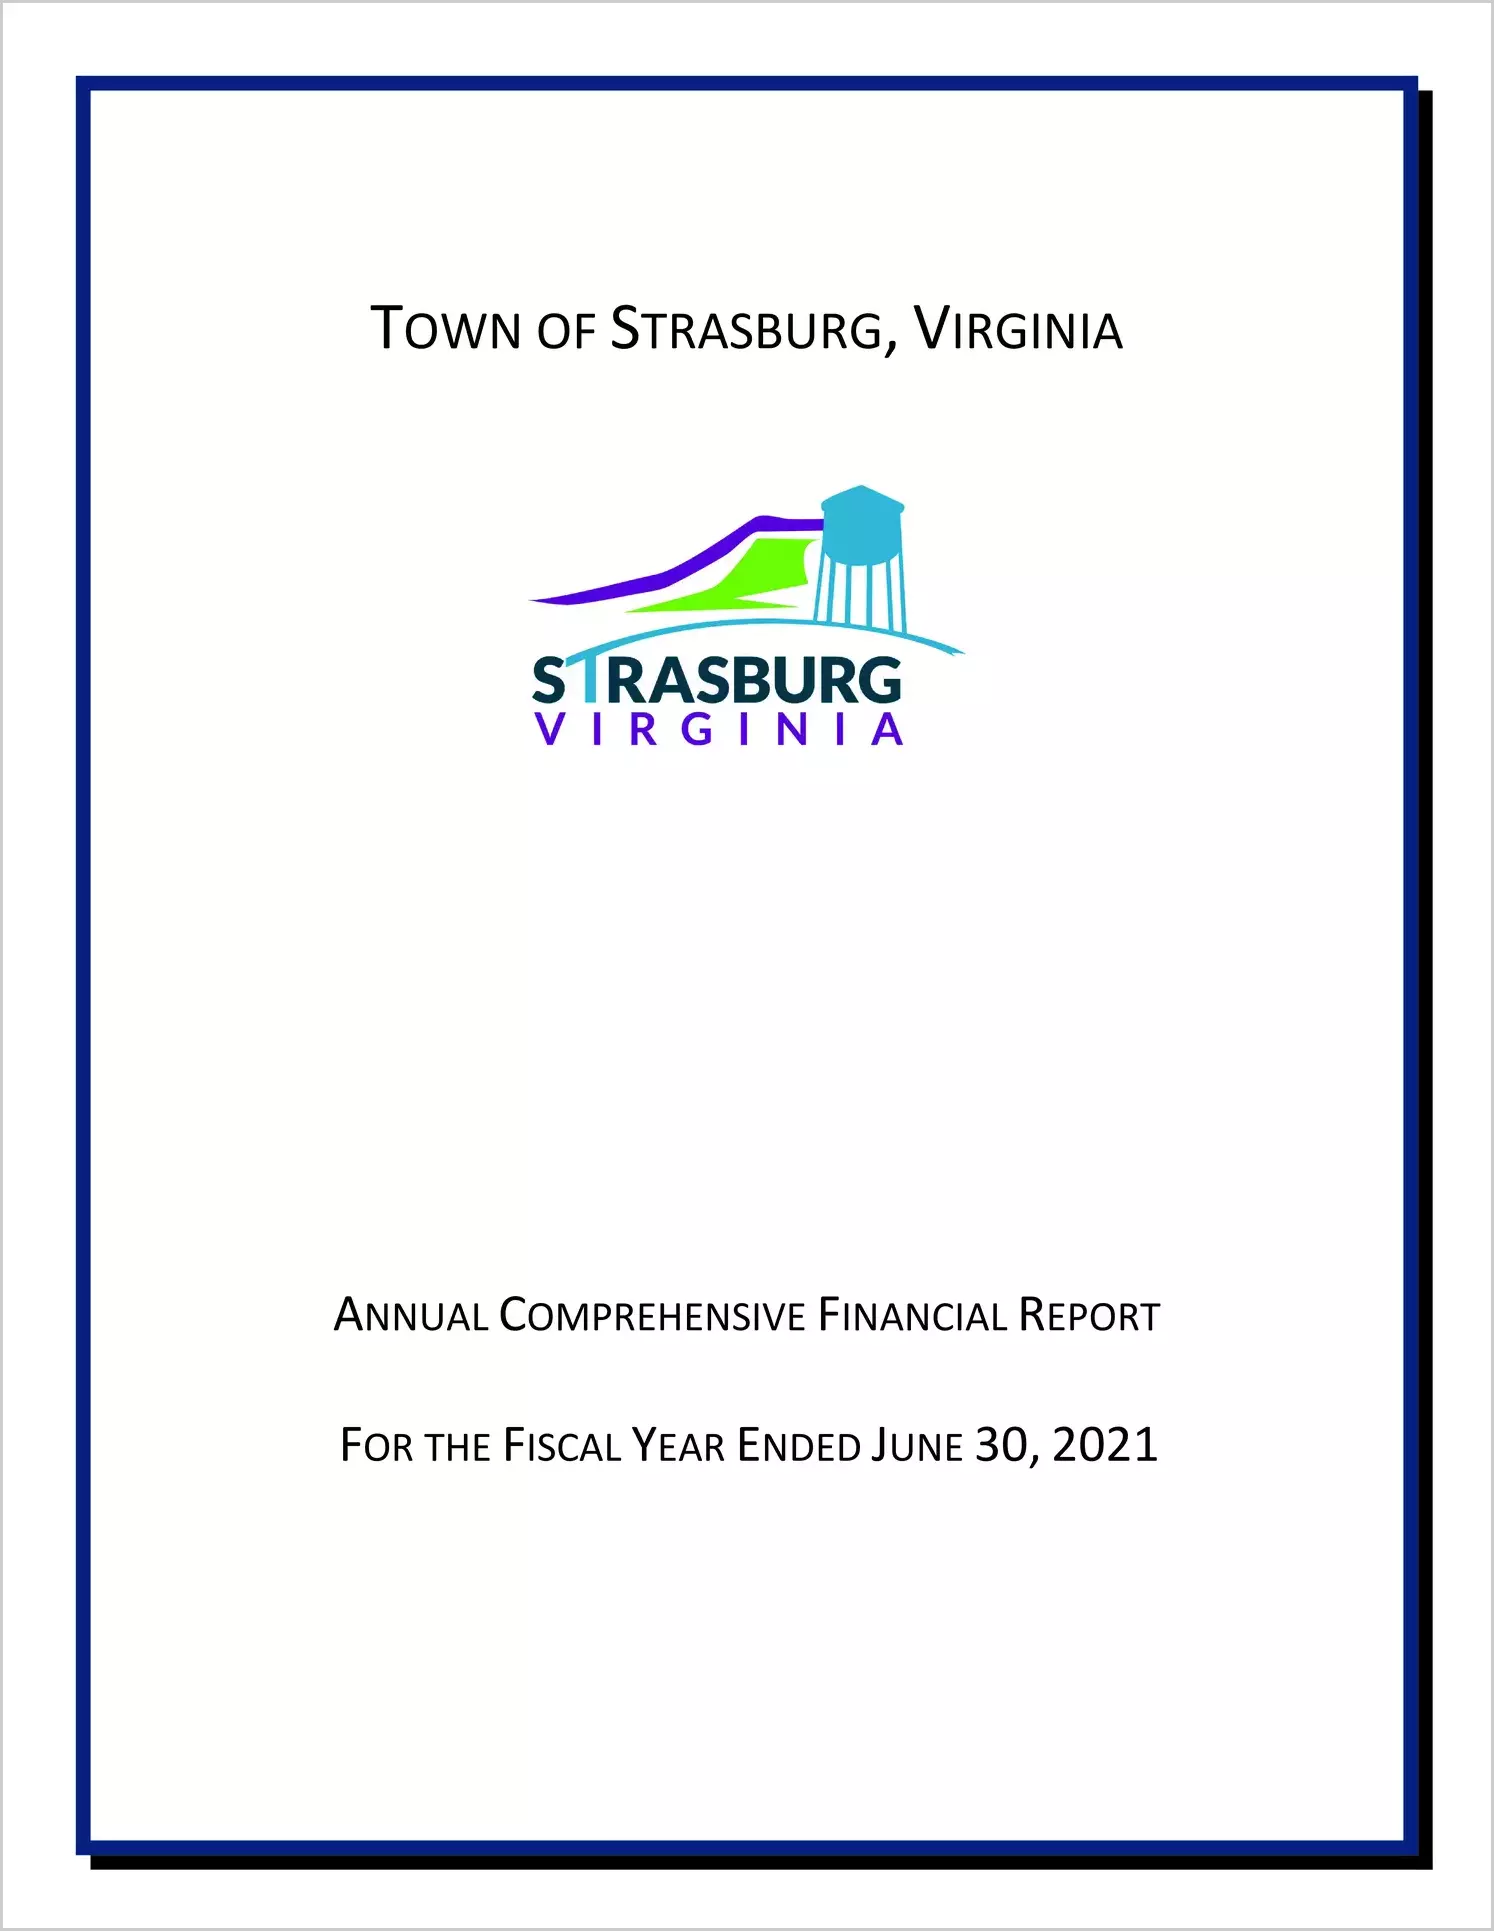 2021 Annual Financial Report for Town of Strasburg